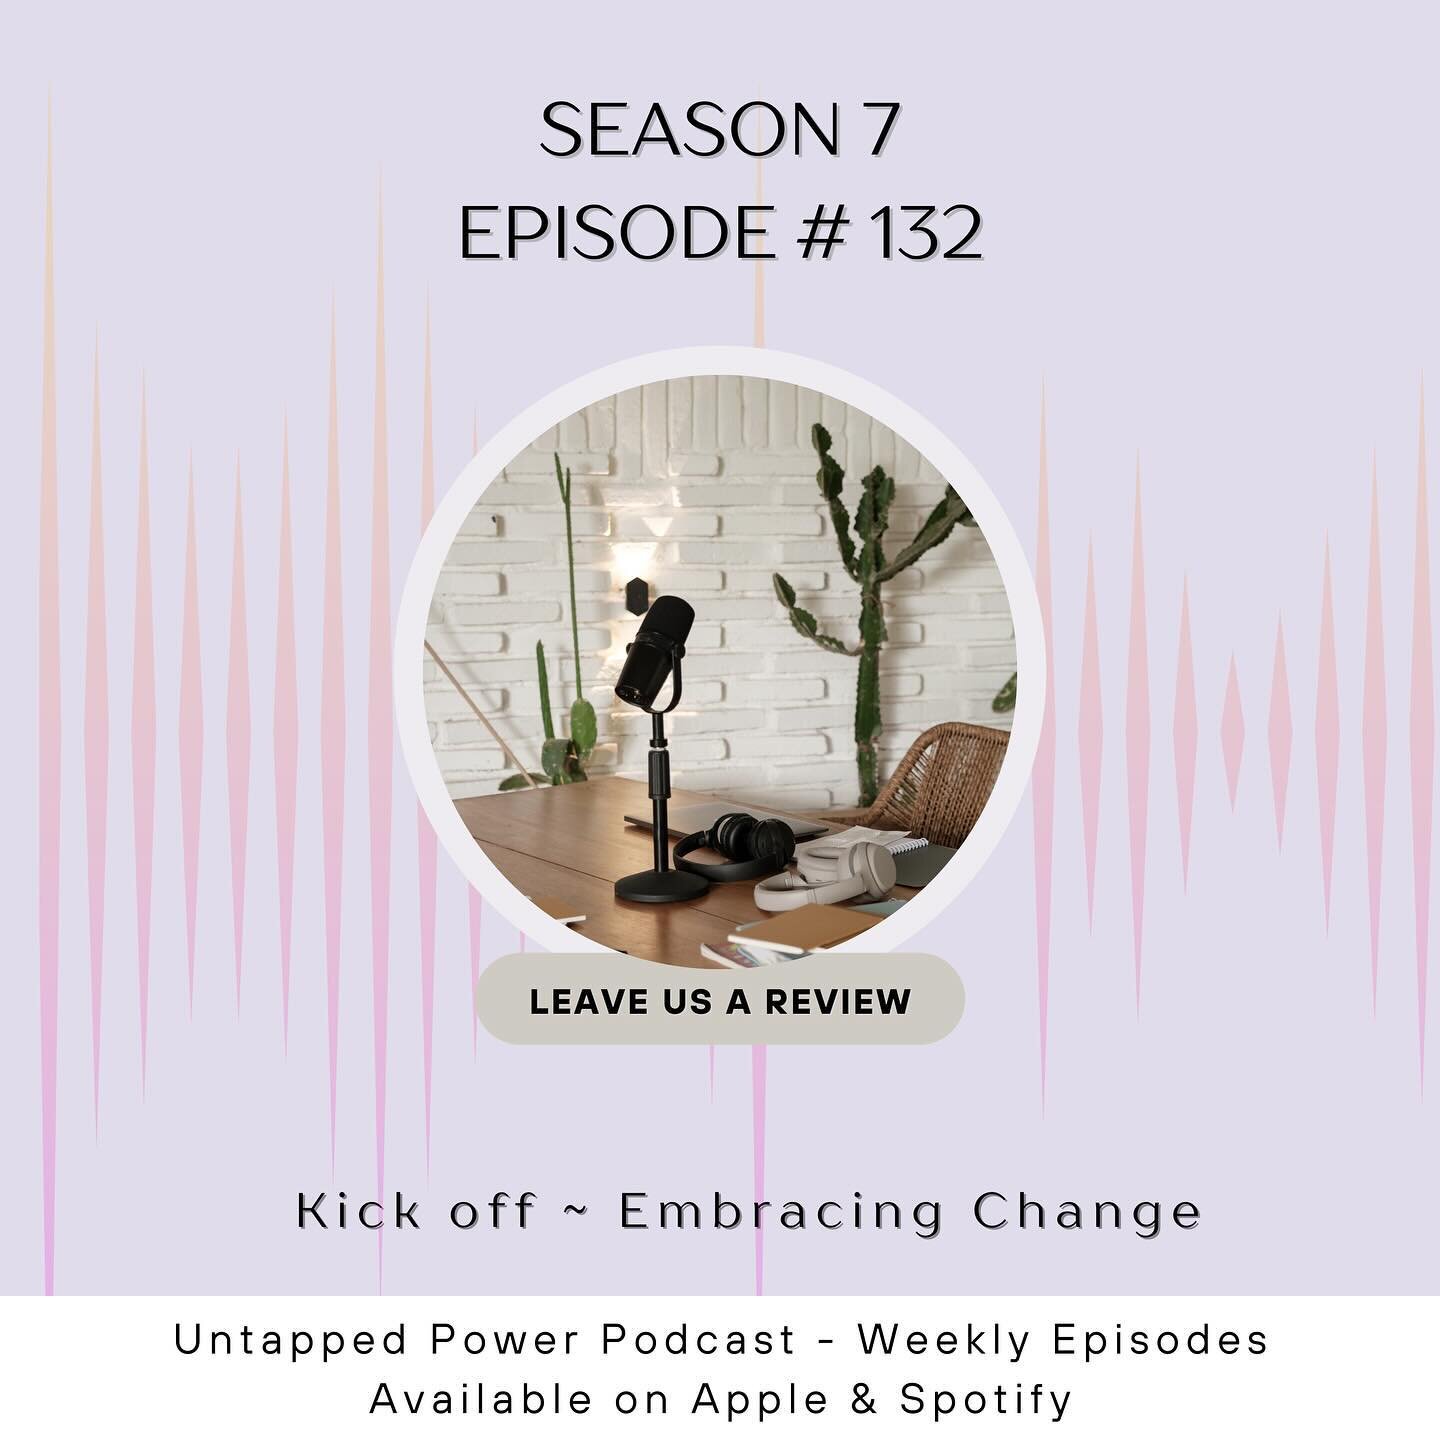 Back for Season 7 of Untapped Power 🎙️🔥

Excited to kick off a new season and to welcome some more amazing guests.

Check it out on apple or Spotify

#podcast #untappedpower #newseason #community #connection #yogainspiration